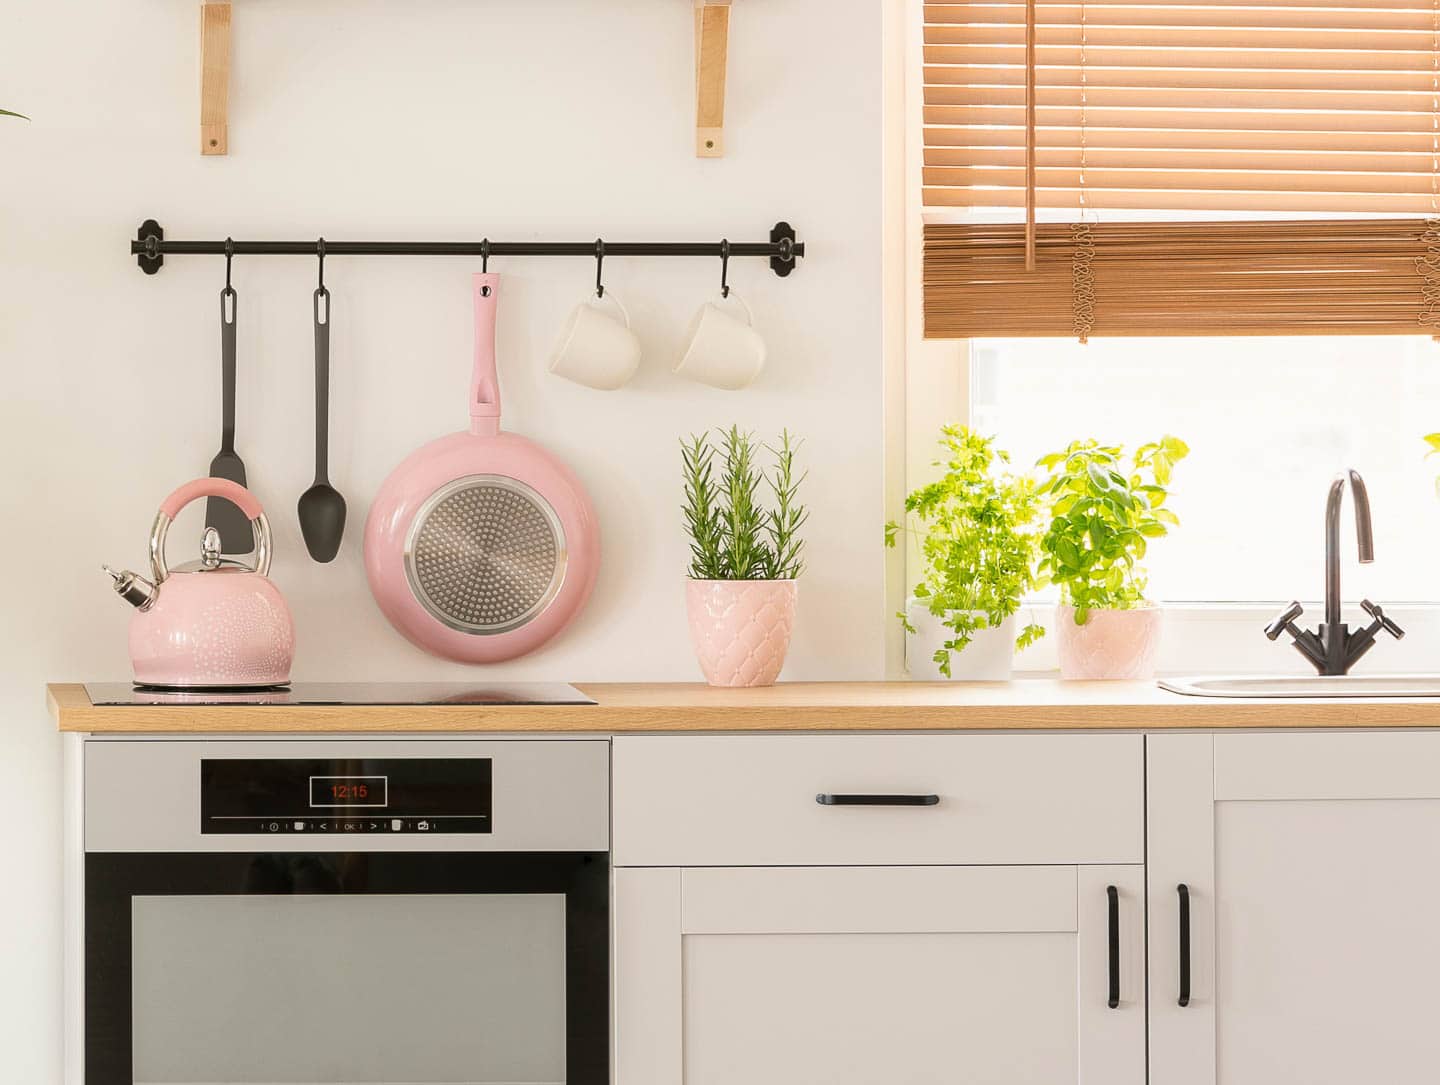 ivory kitchen with pink accessories - kettle, frying pan and planter